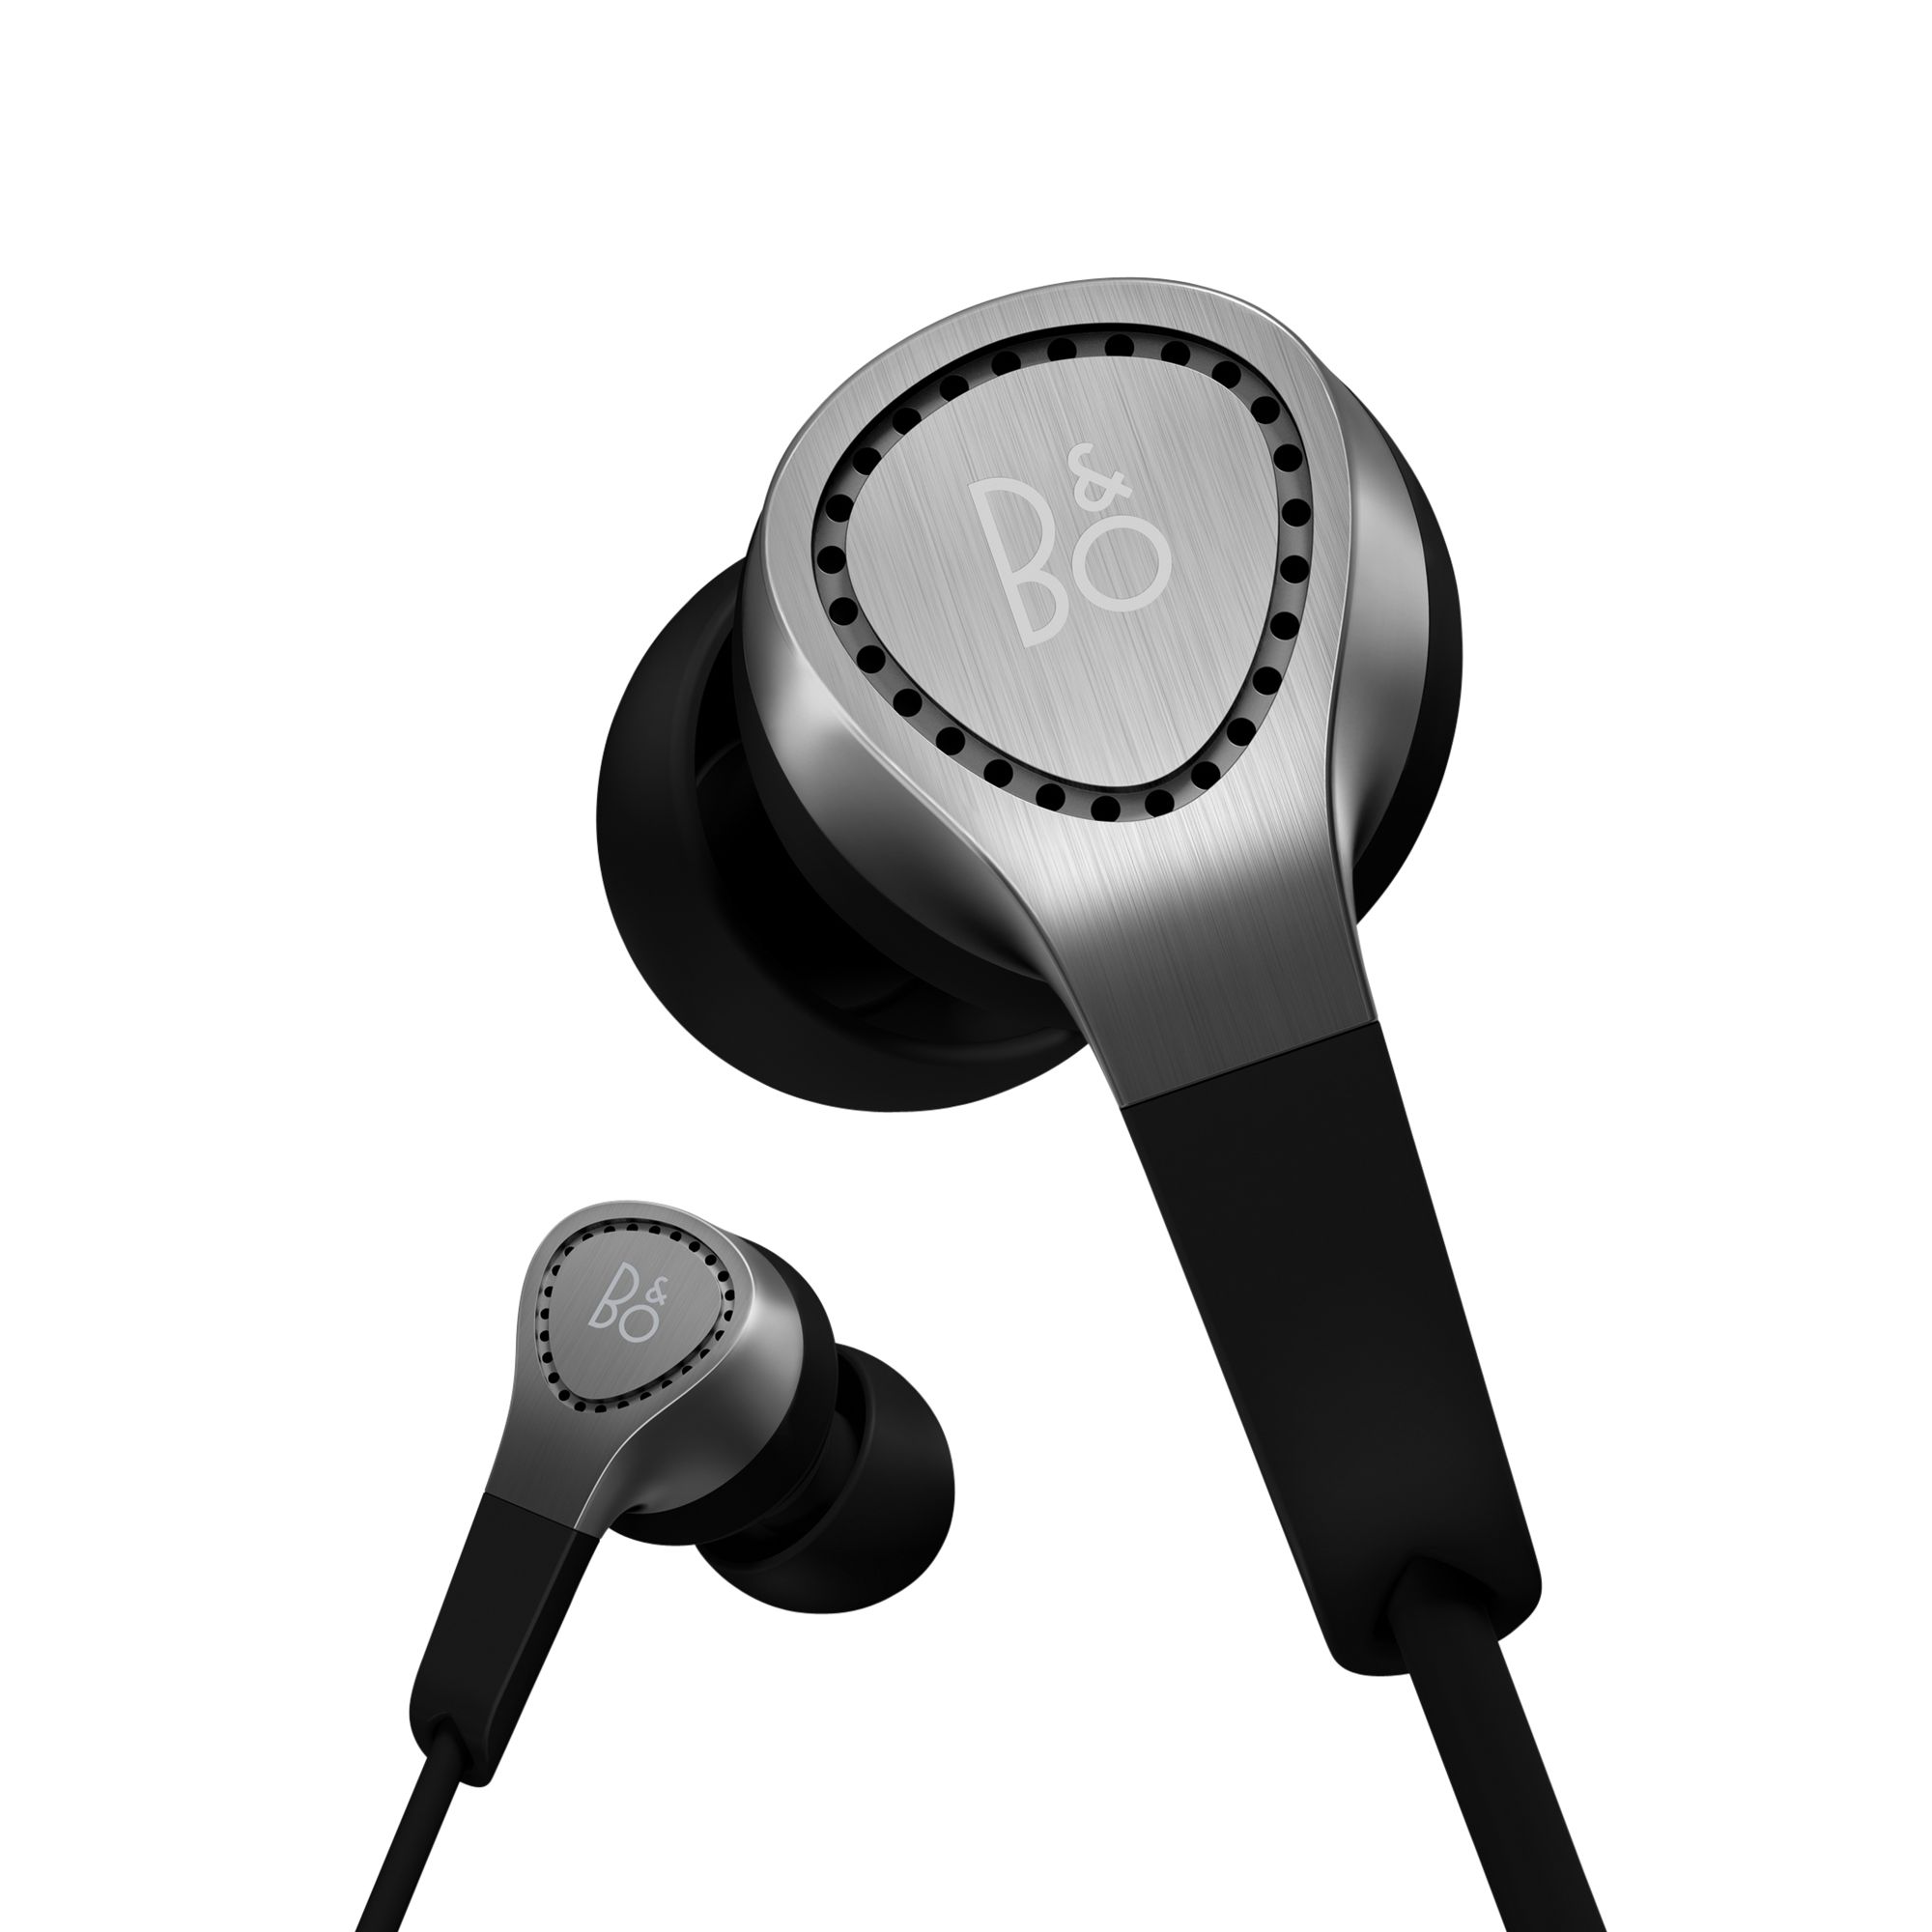 Bang & Olufsen Beoplay H3 In-Ear Headphones with Mic/Remote for iOS Devices